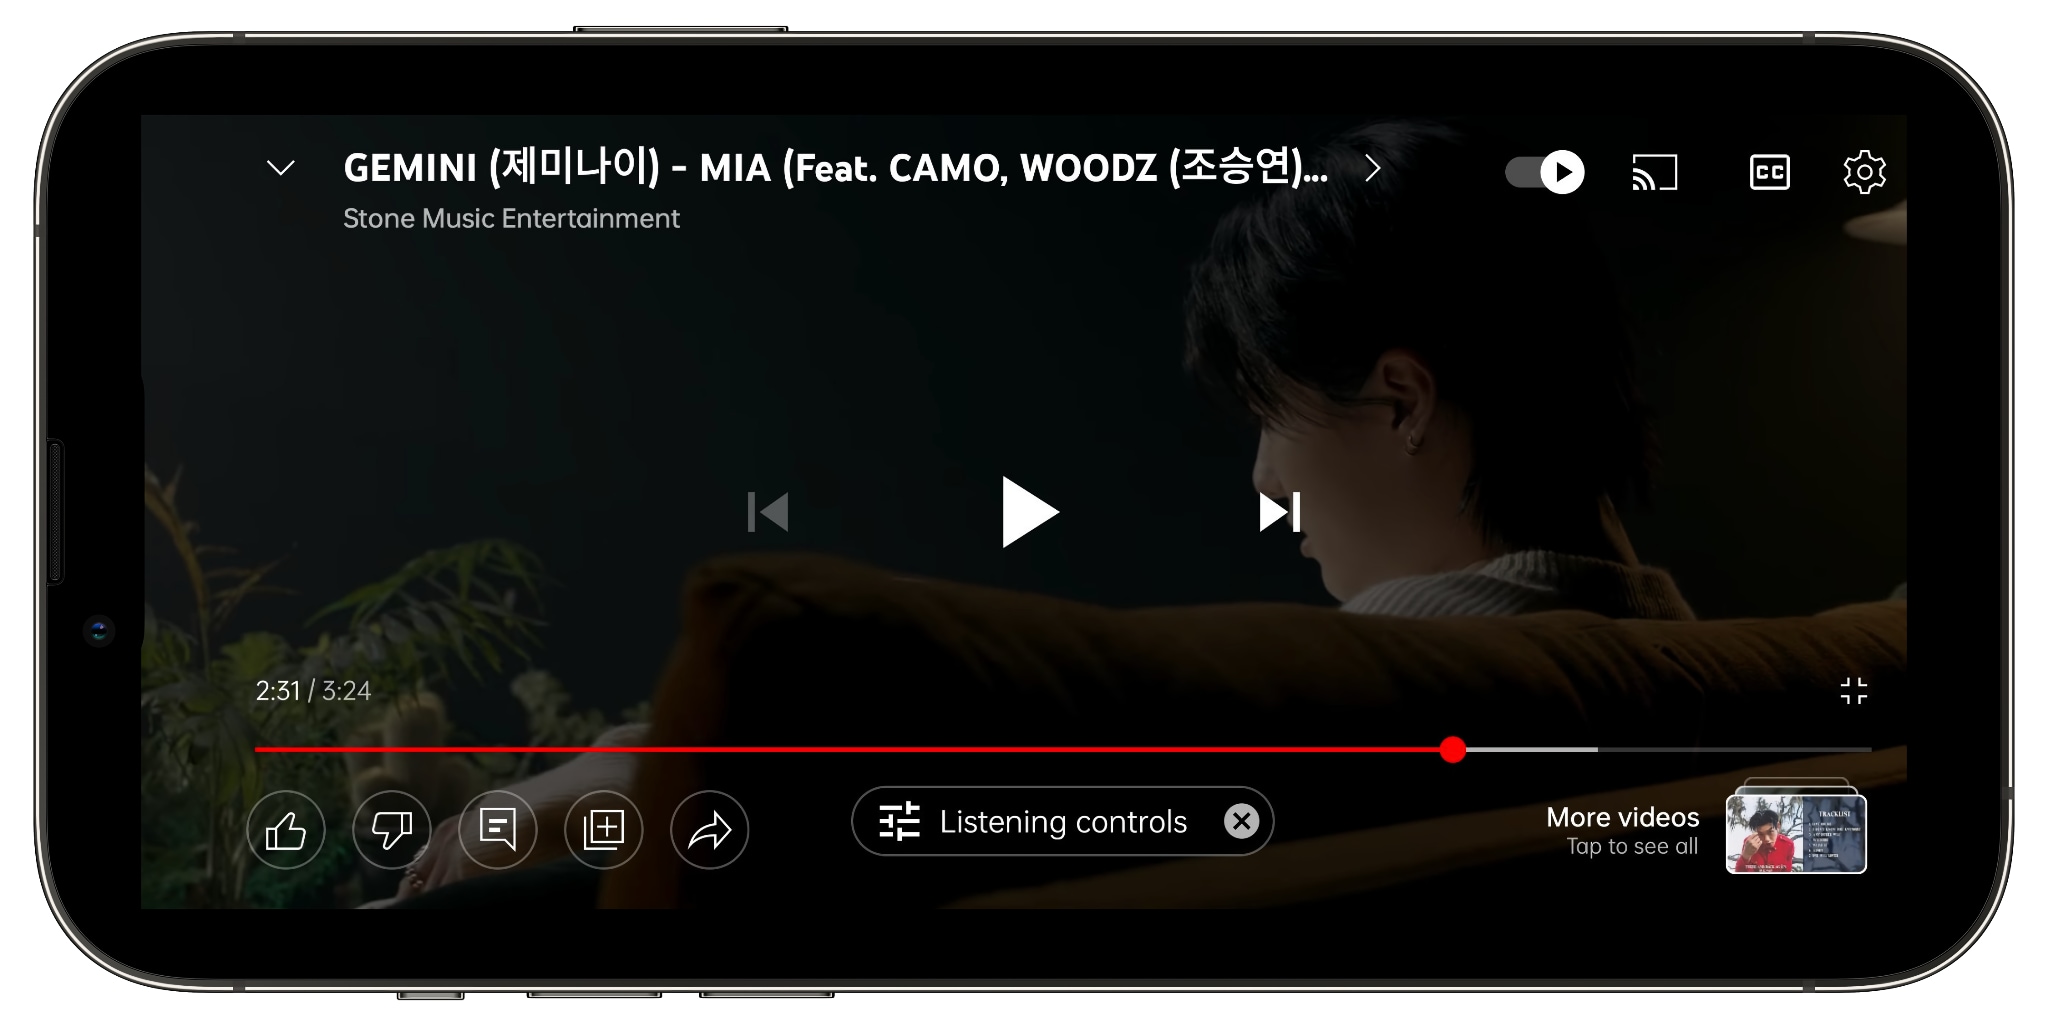 Device screenshot showing the new YouTube fullscreen video player in landscape on iPhone